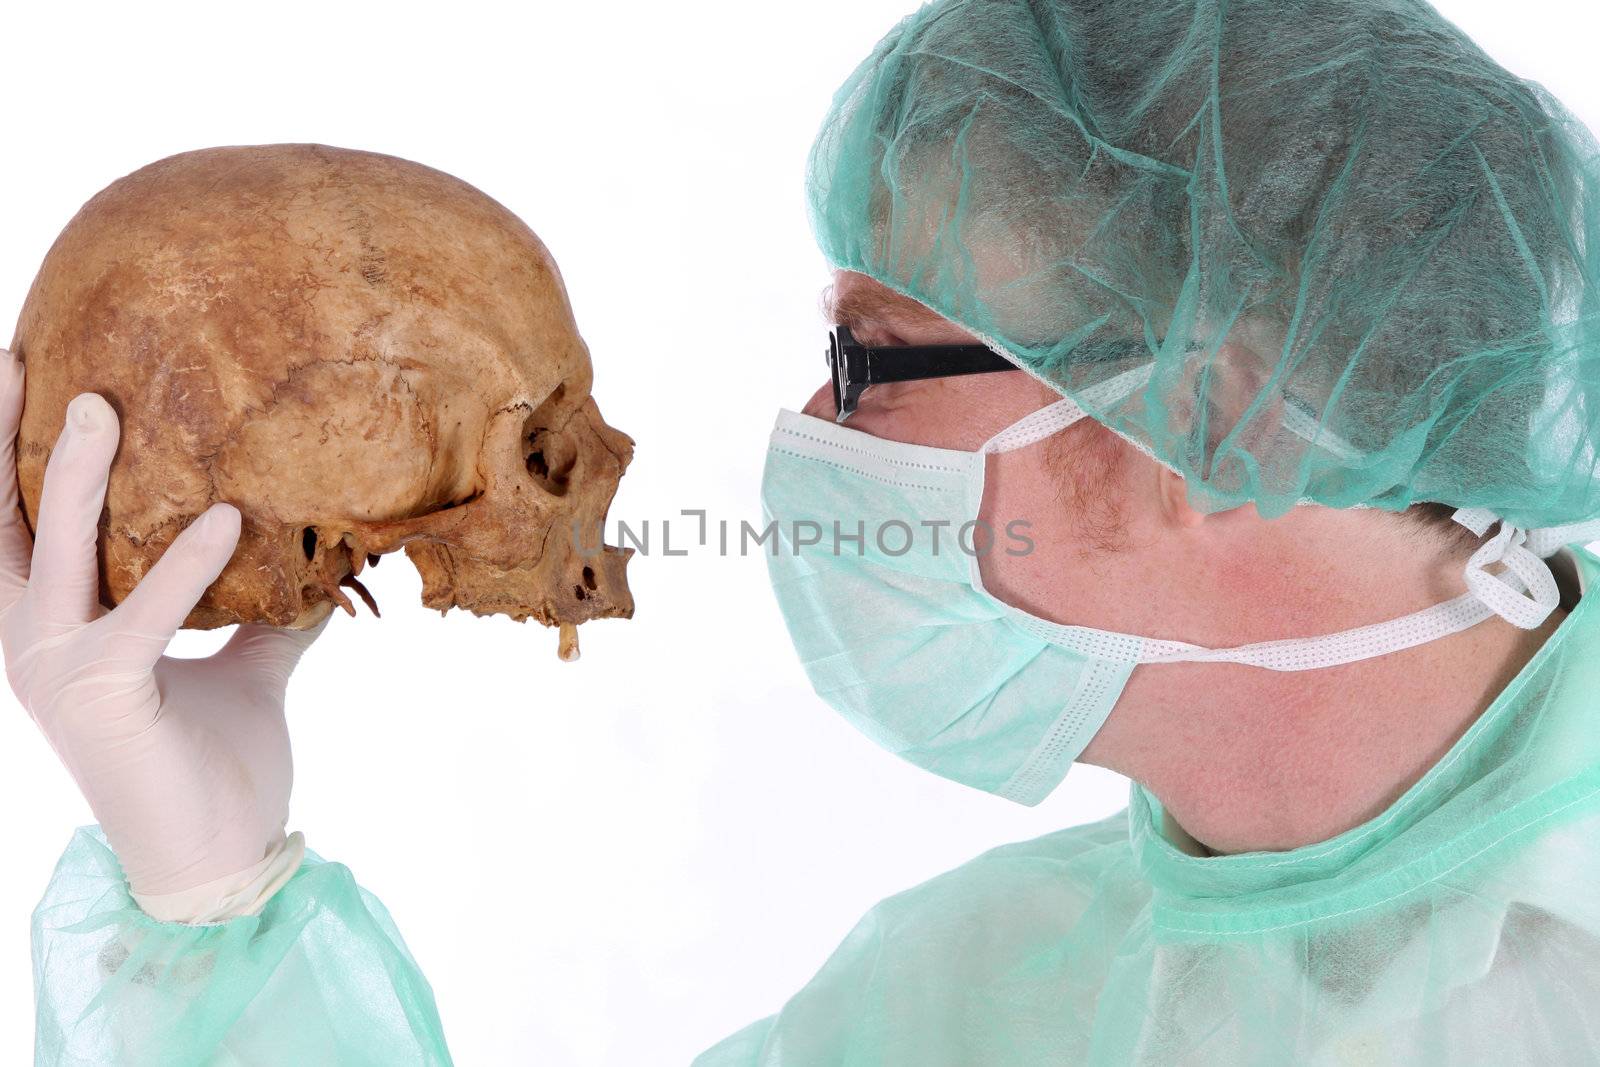 Details surgeon with skull on white background